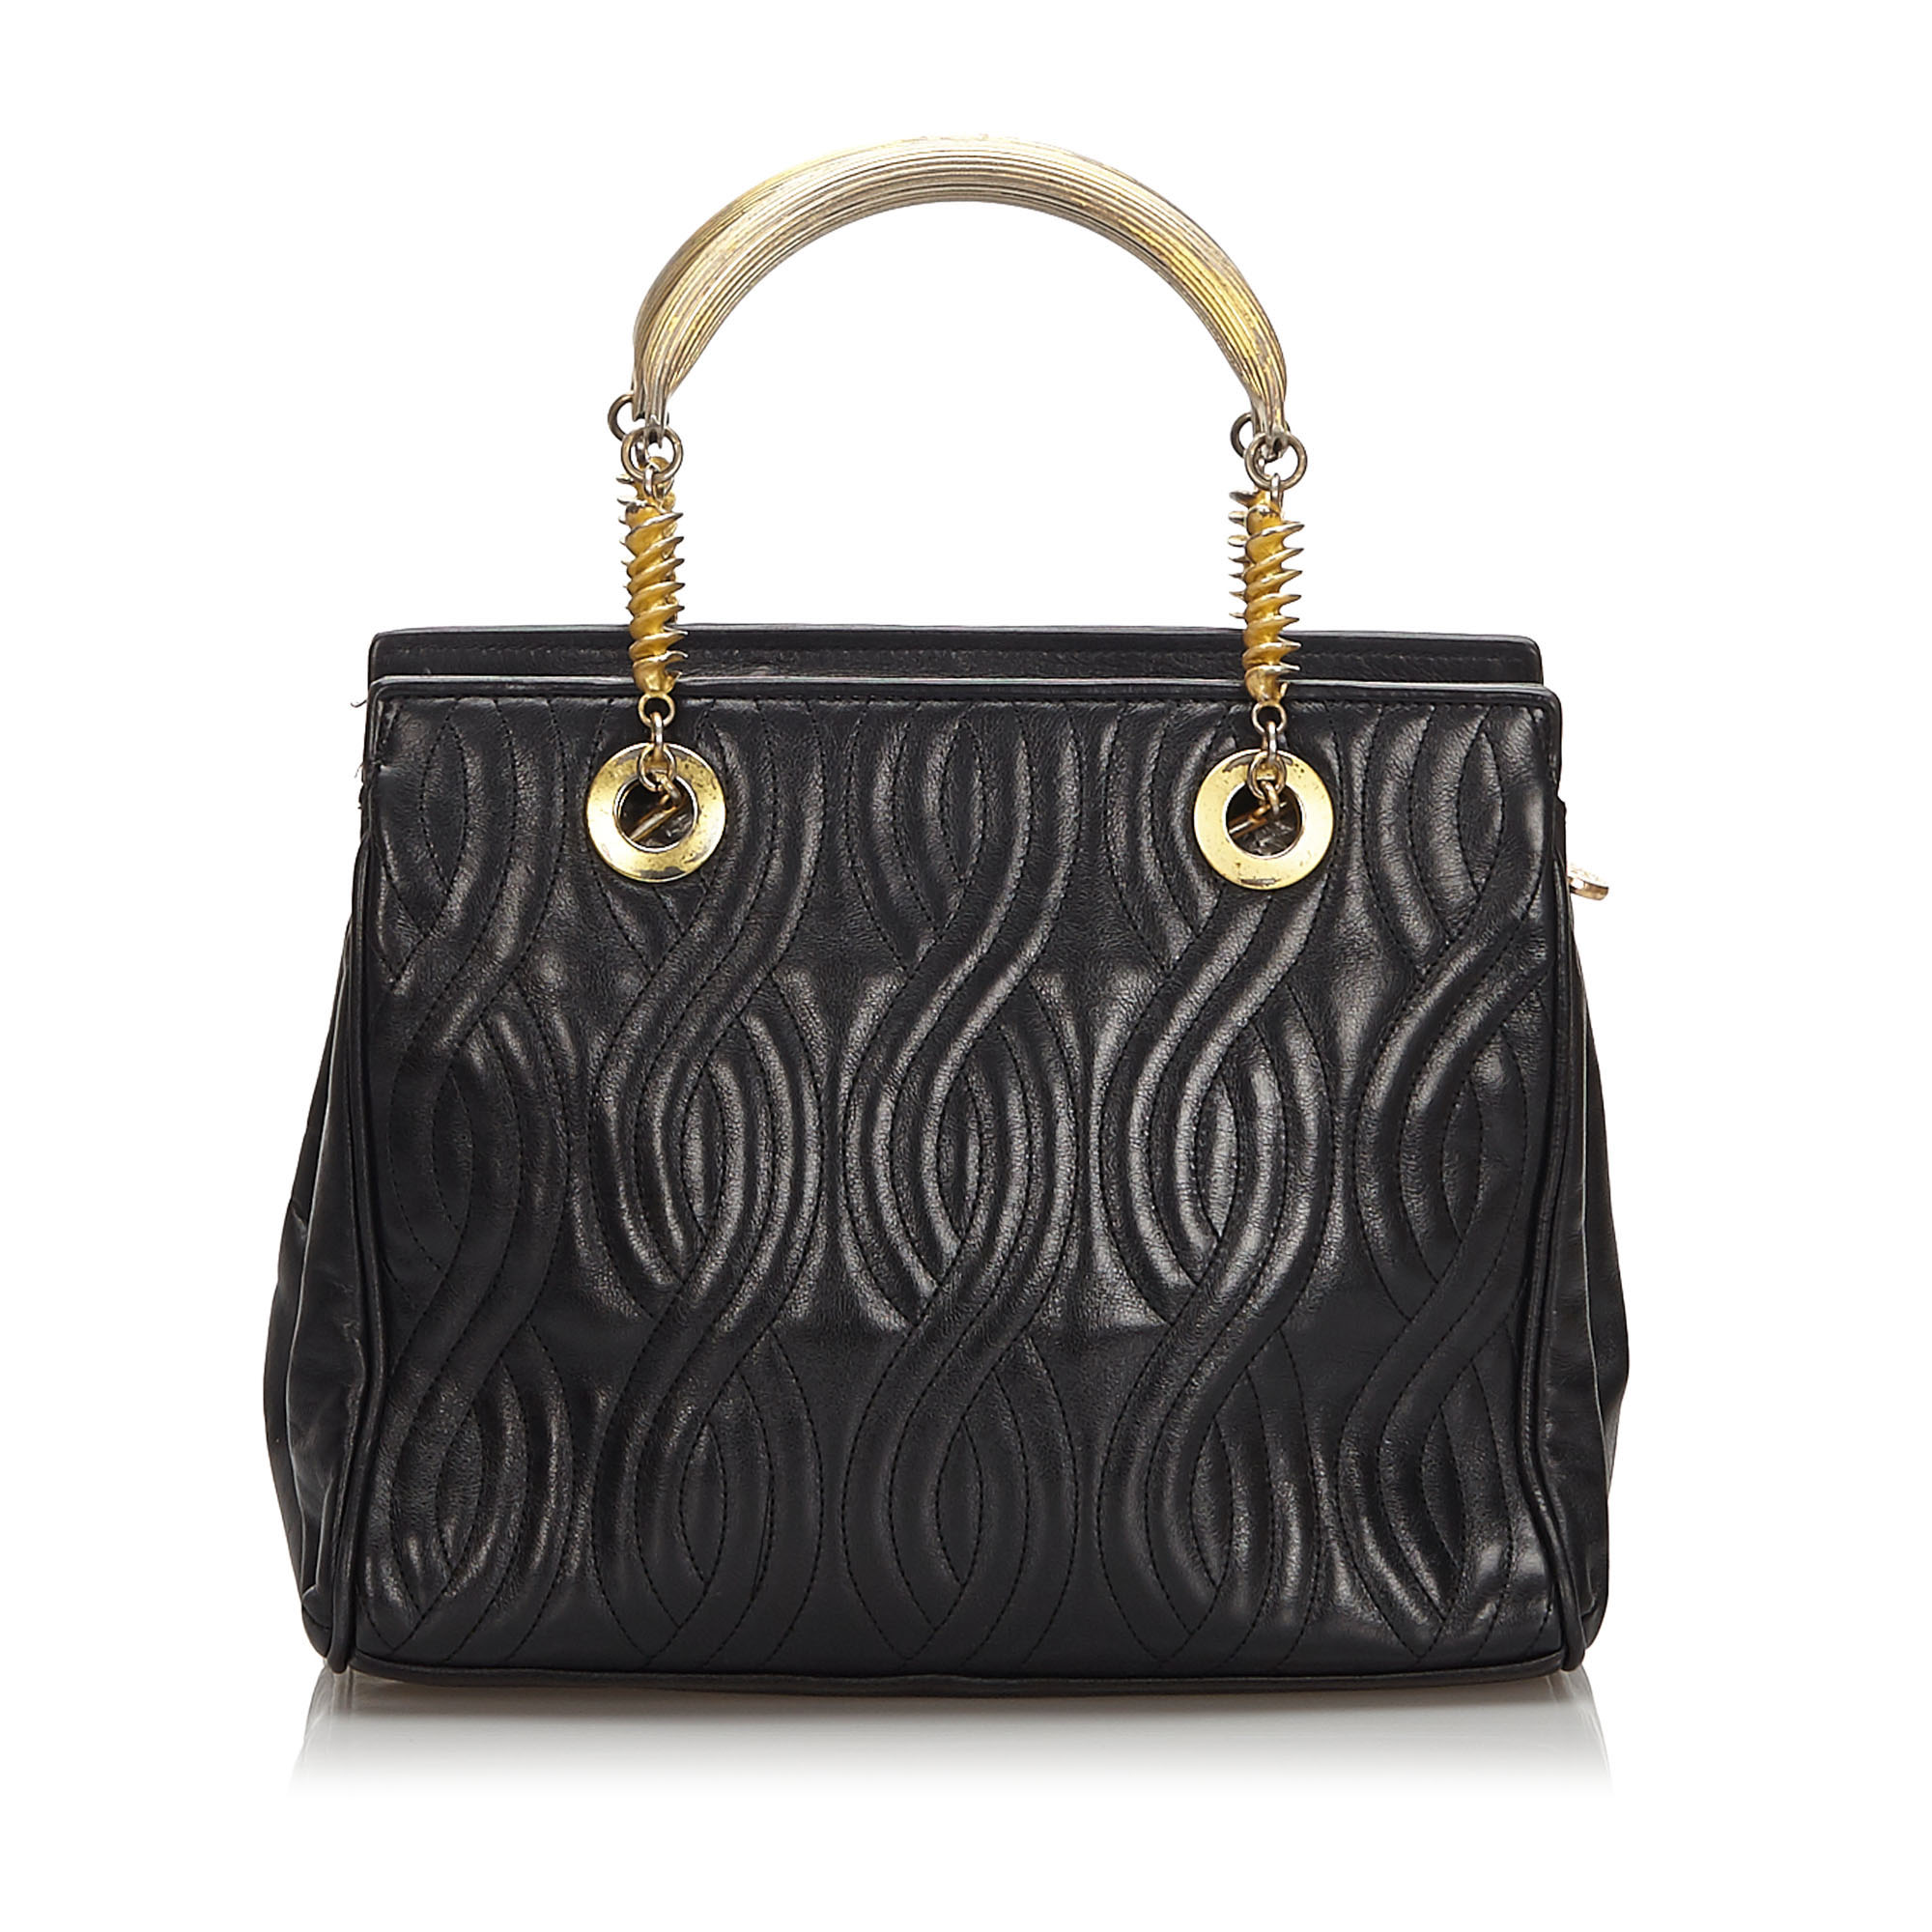 Fendi Quilted Leather Tote Bag, this tote bag features a quilted leather body, metal handles, a - Image 3 of 11